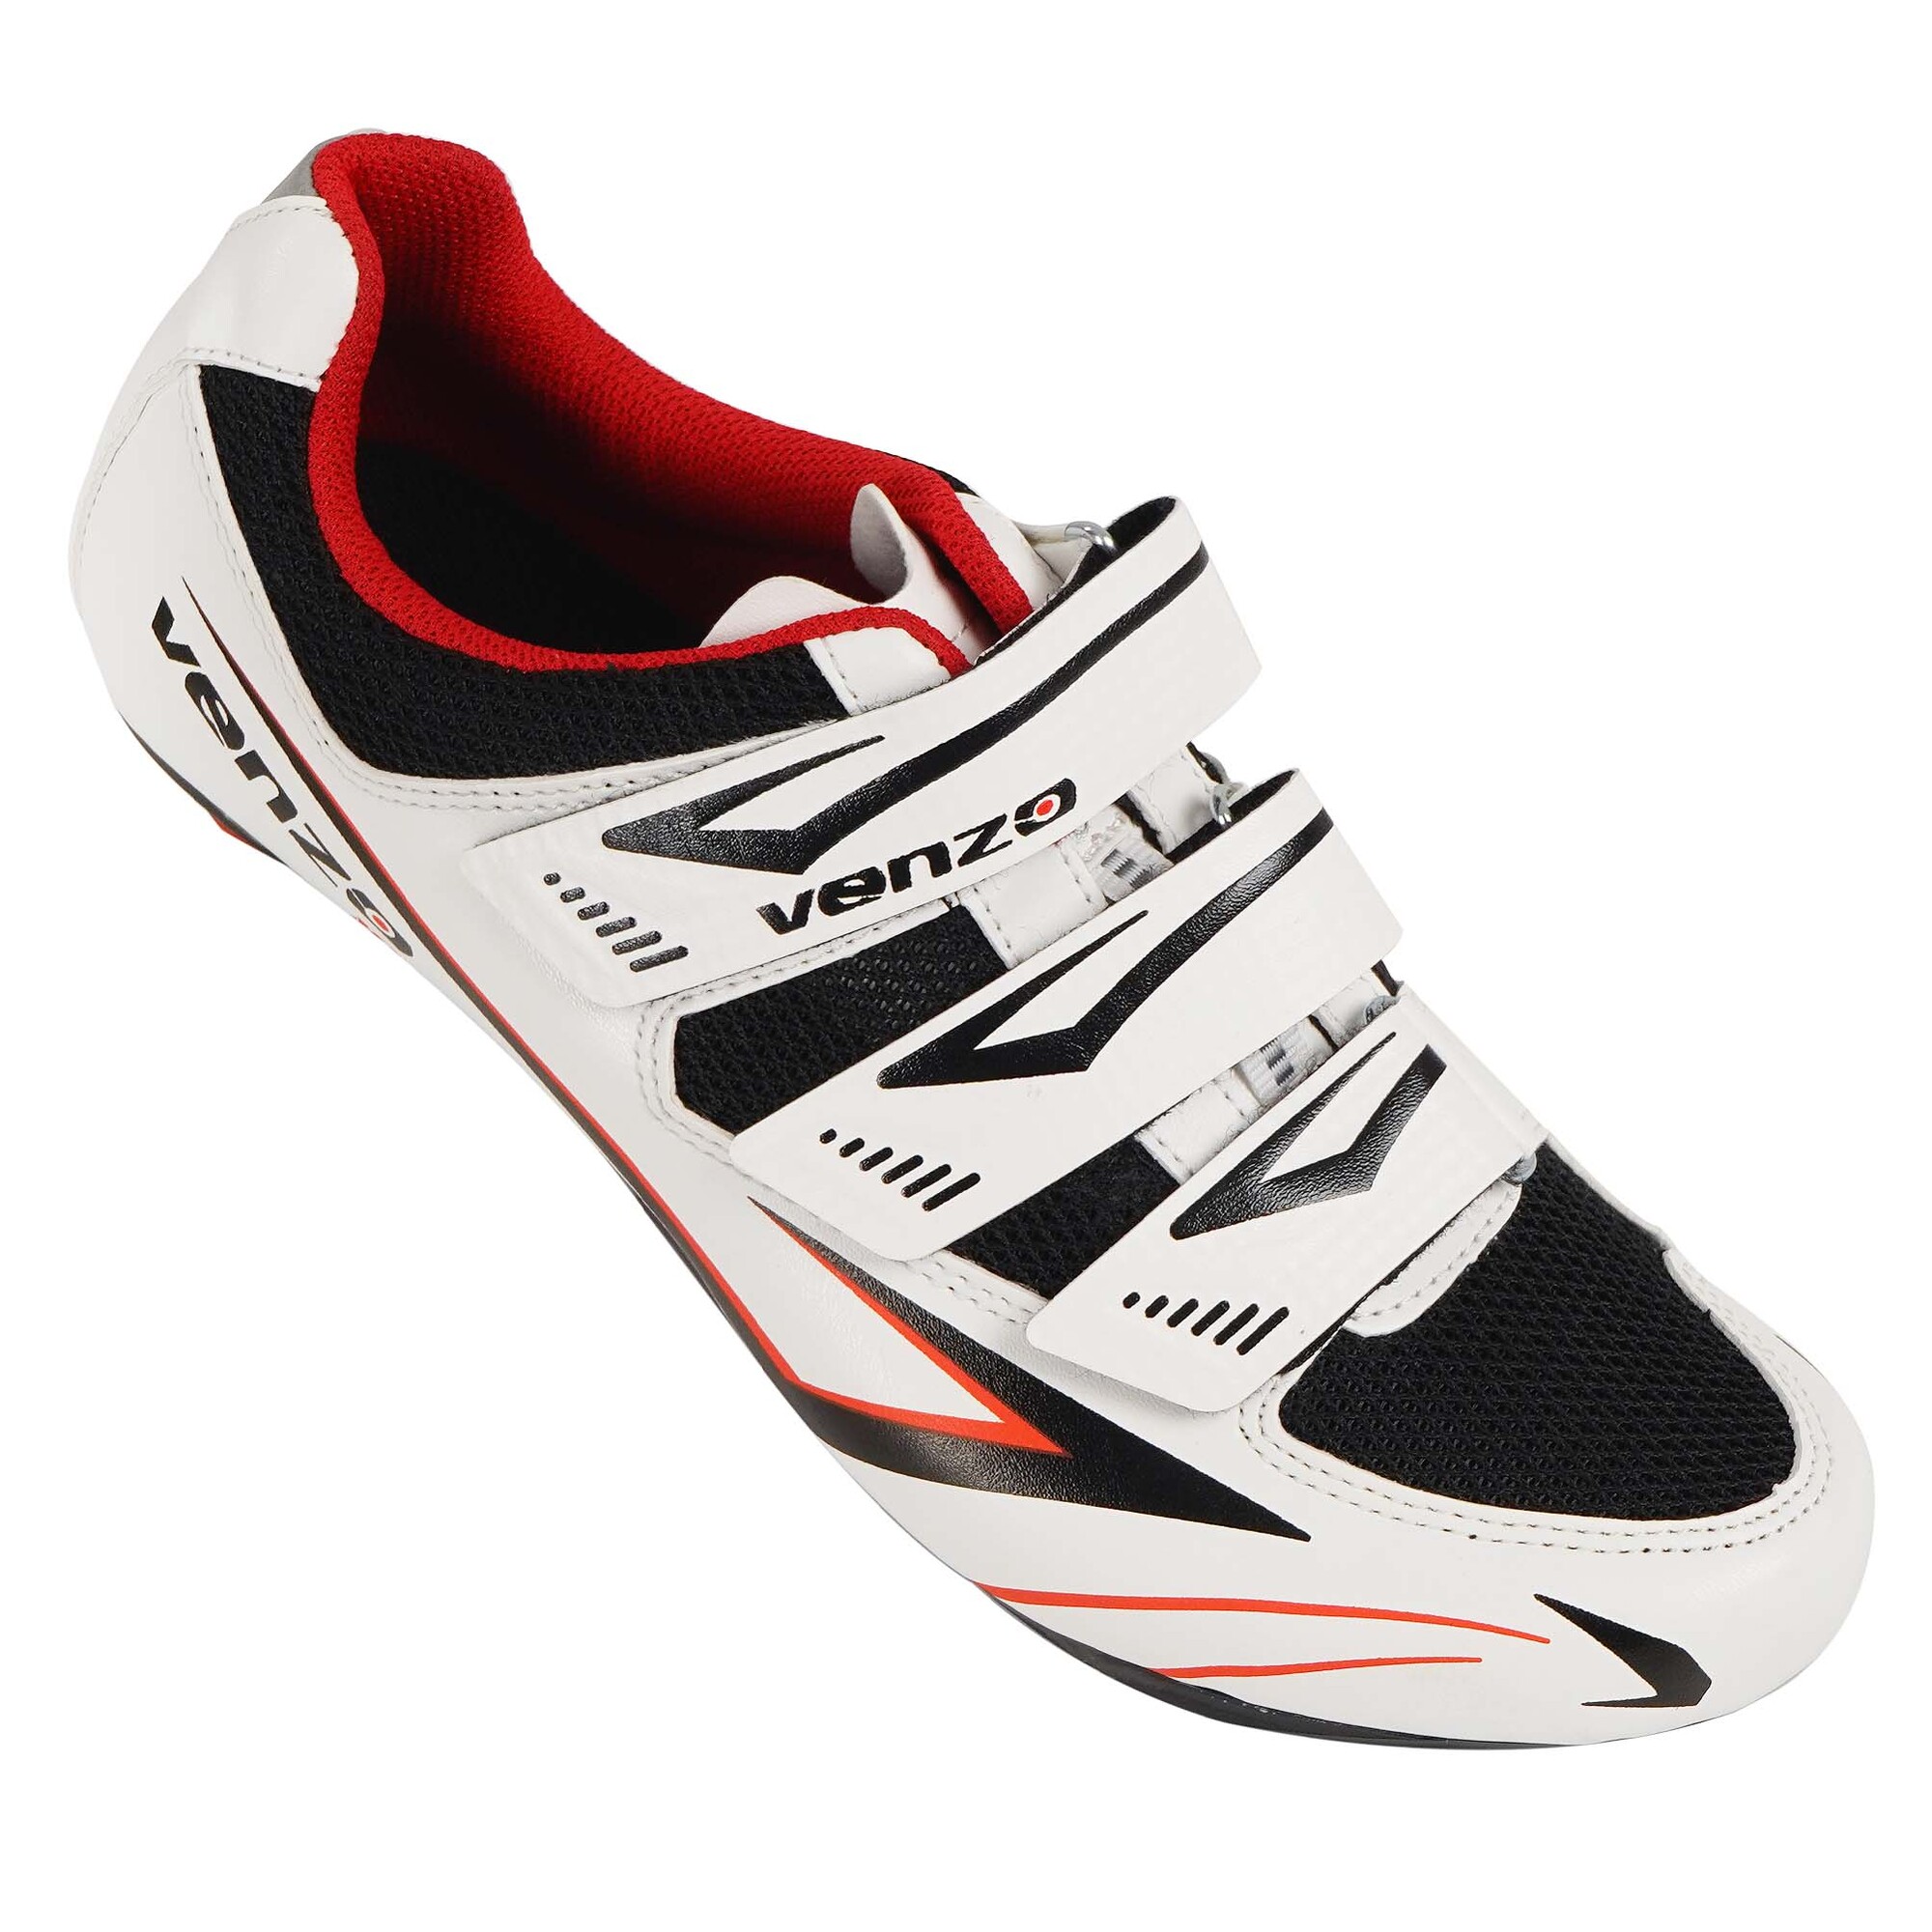 Venzo Road Bike For Shimano SPD SL Look Cycling Bicycle Shoes 48